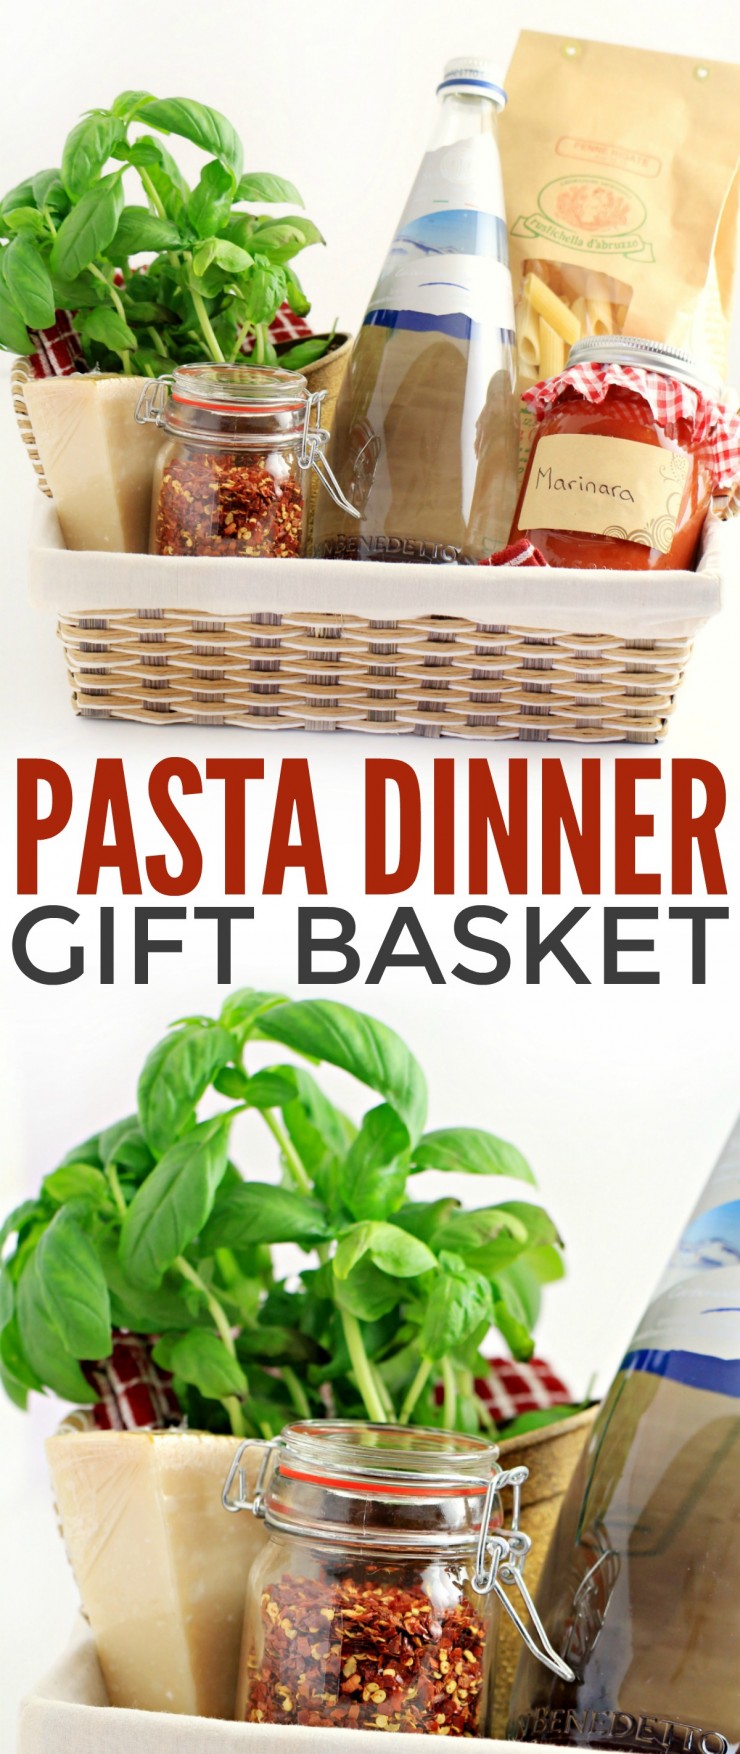 This Italian-inspired gourmet pasta dinner gift basket includes everything the recipient needs to enjoy a special pasta dinner.  It's the perfect gift for someone who doesn't often take the time they need to treat themselves.